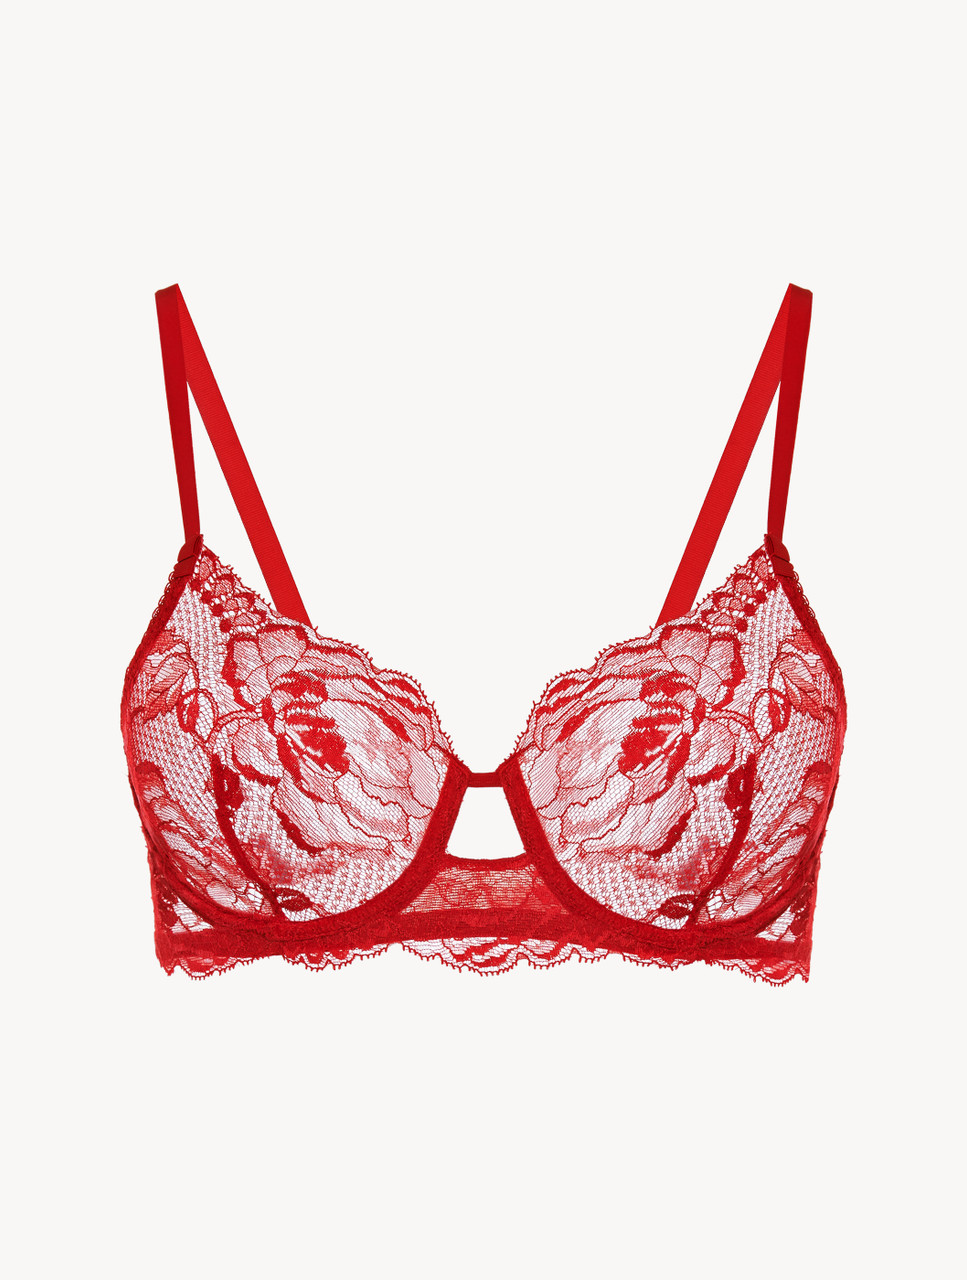 NWOT Comfort Choice Red Lace 40DDD Posture Support Soft Cup Bra #83934